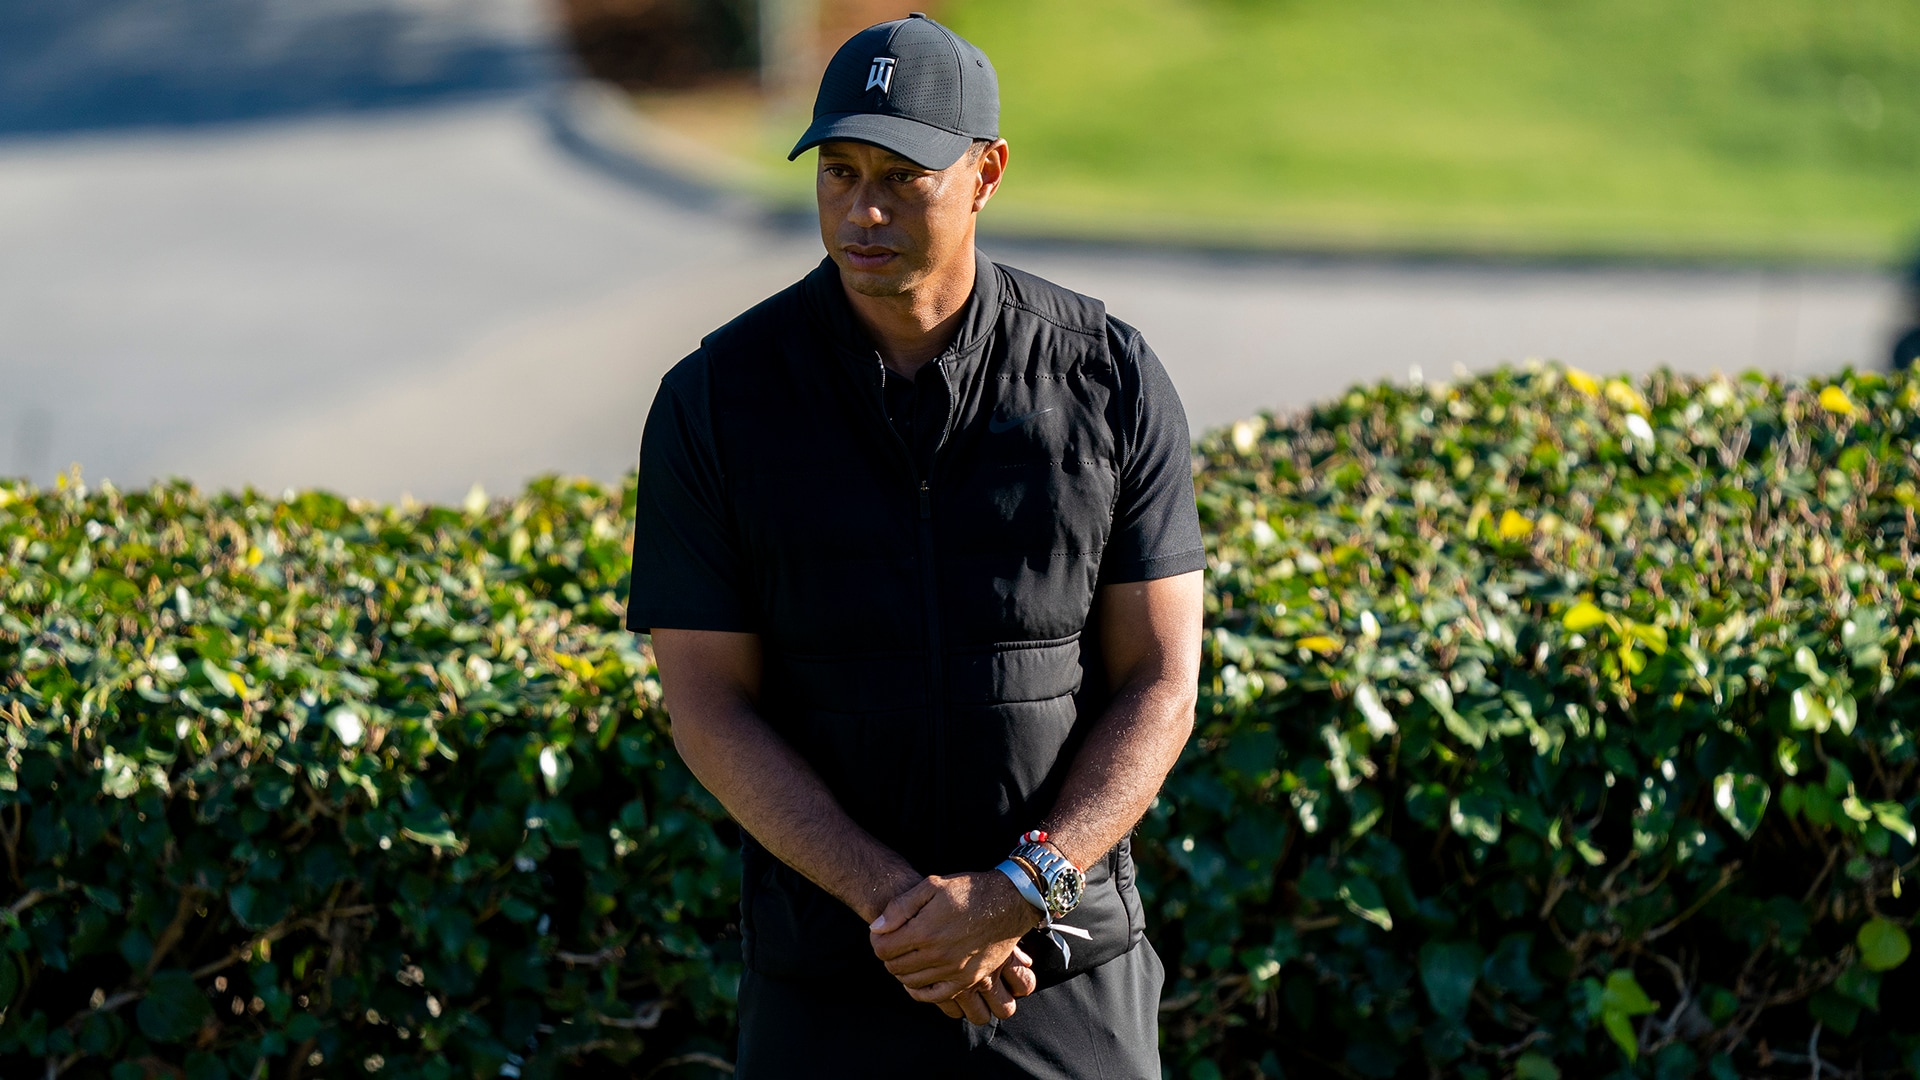 Tour pros, other golfers and athletes react to Tiger Woods news